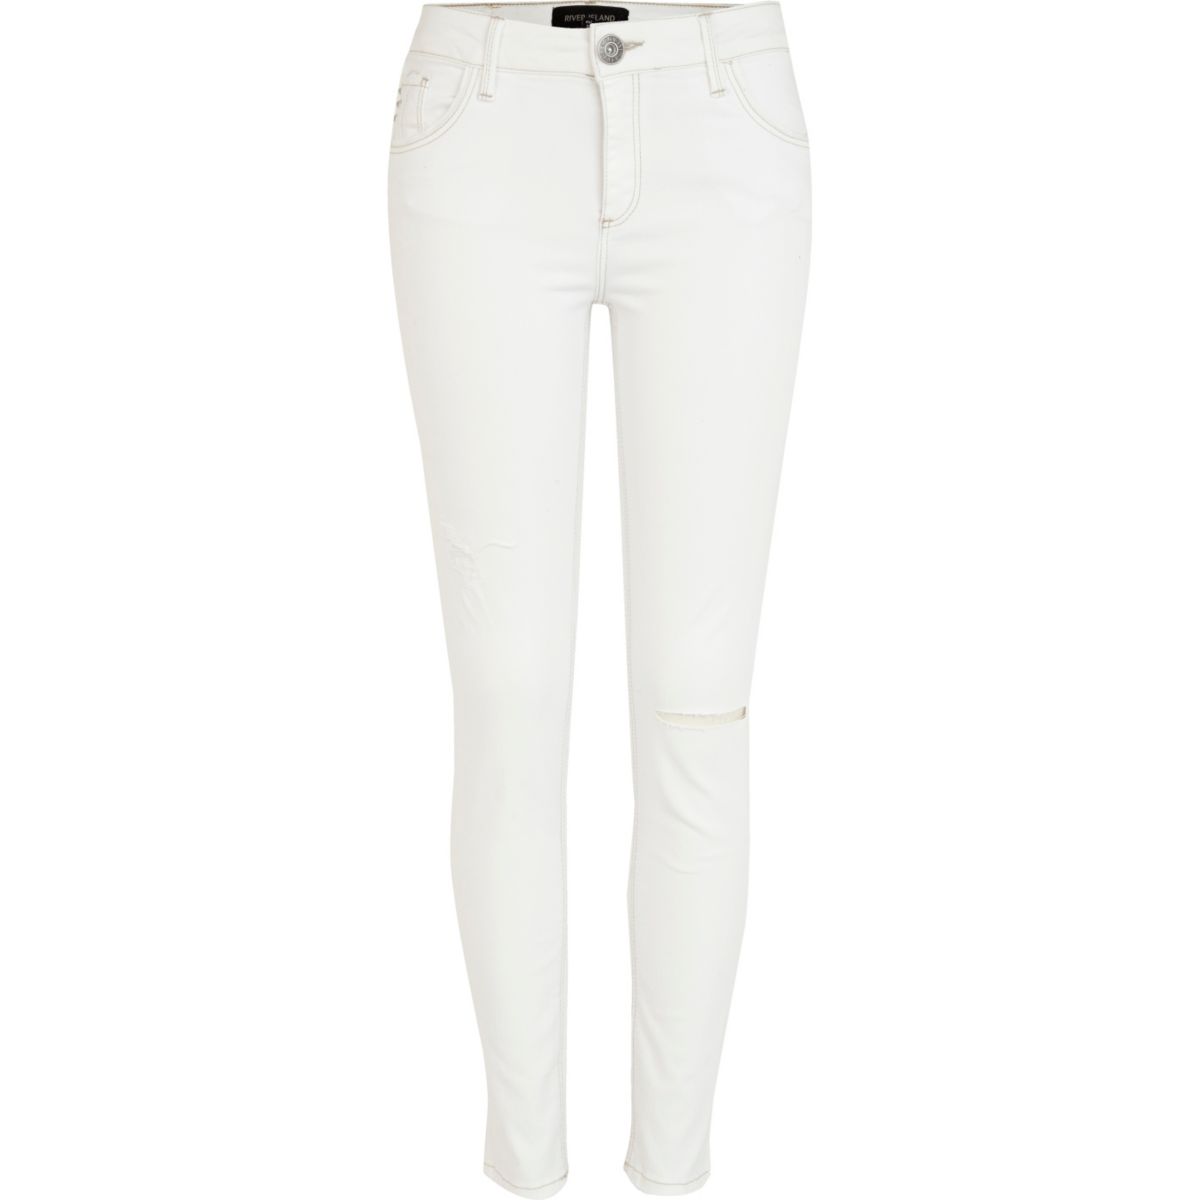 White ripped Amelie superskinny jeans - Jeans - Sale - women